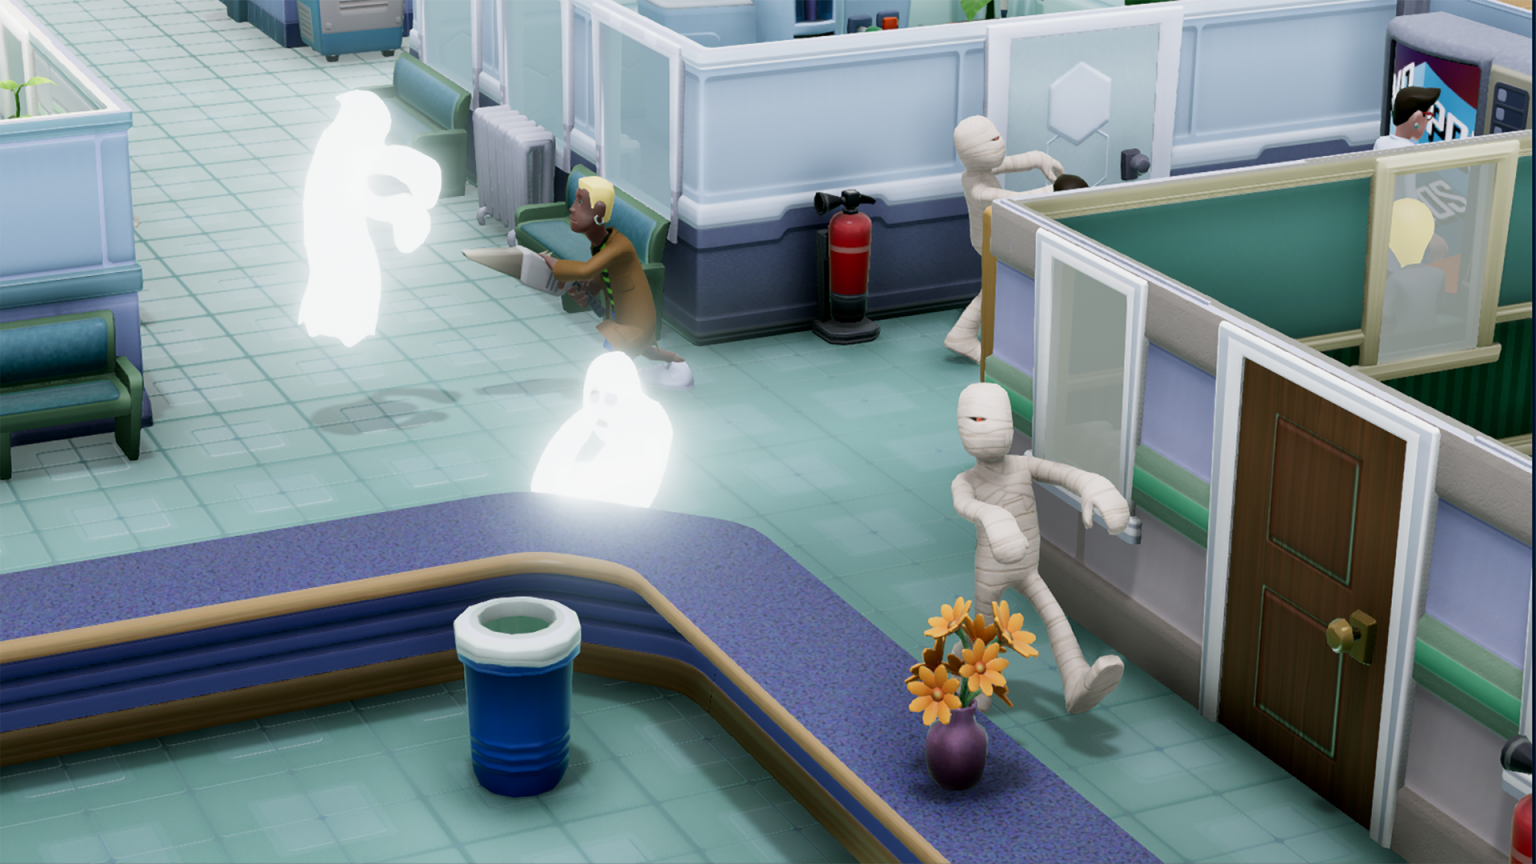 games like two point hospital download